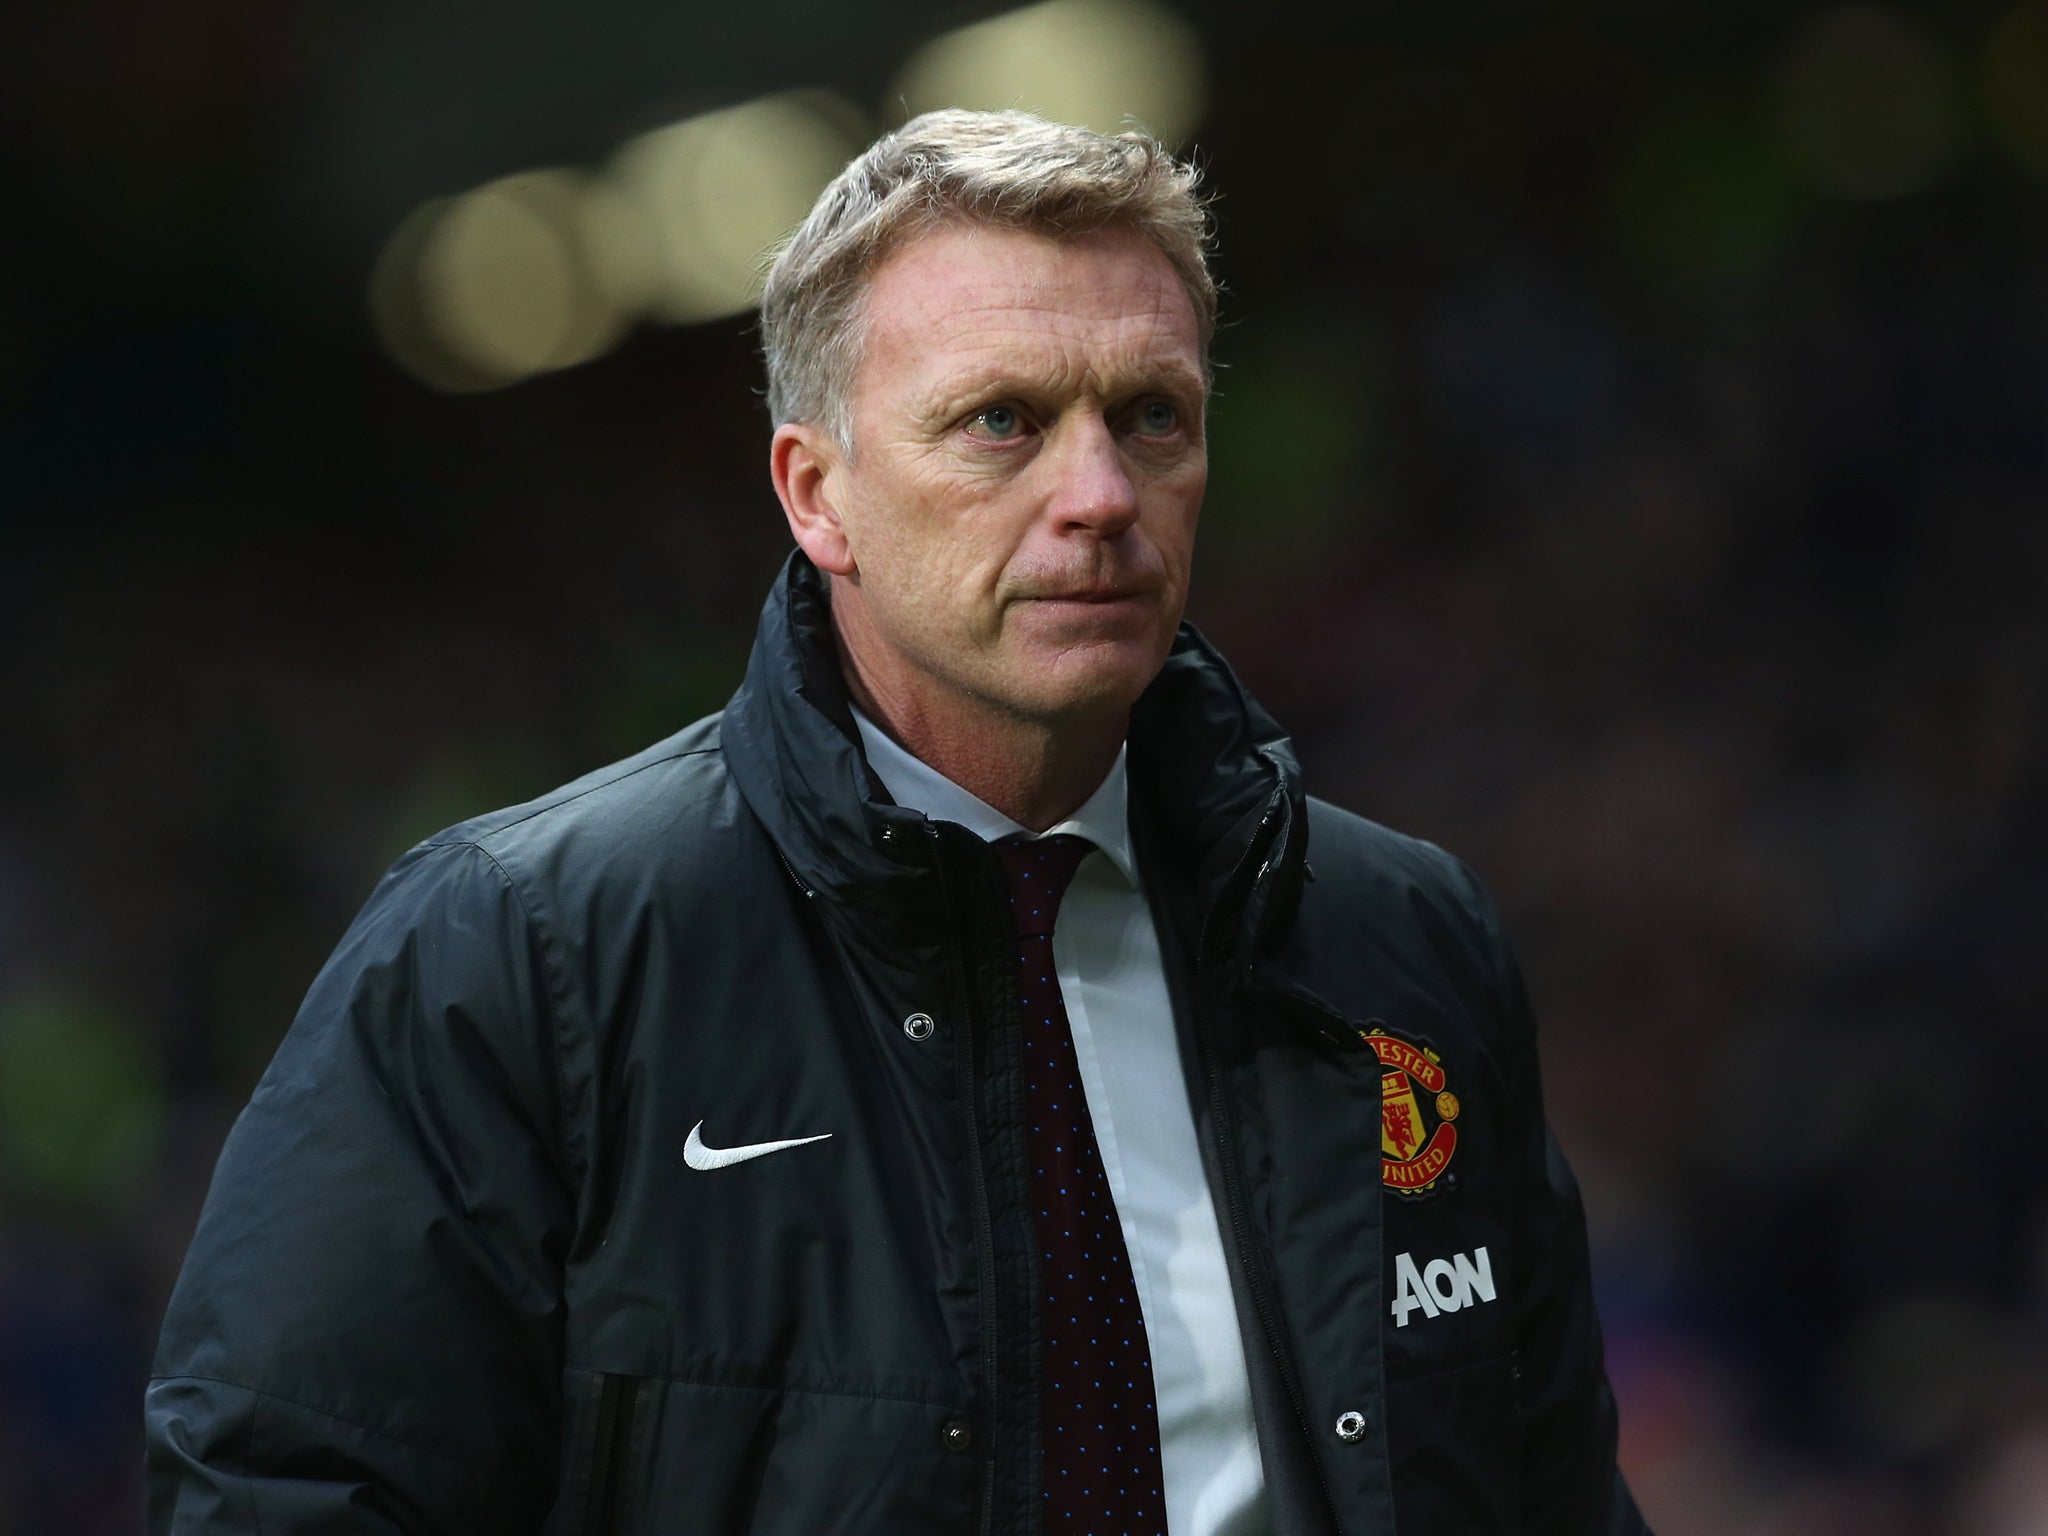 David Moyes is hoping for light at the end of the tunnel after Manchester United's 1-0 defeat to Newcastle